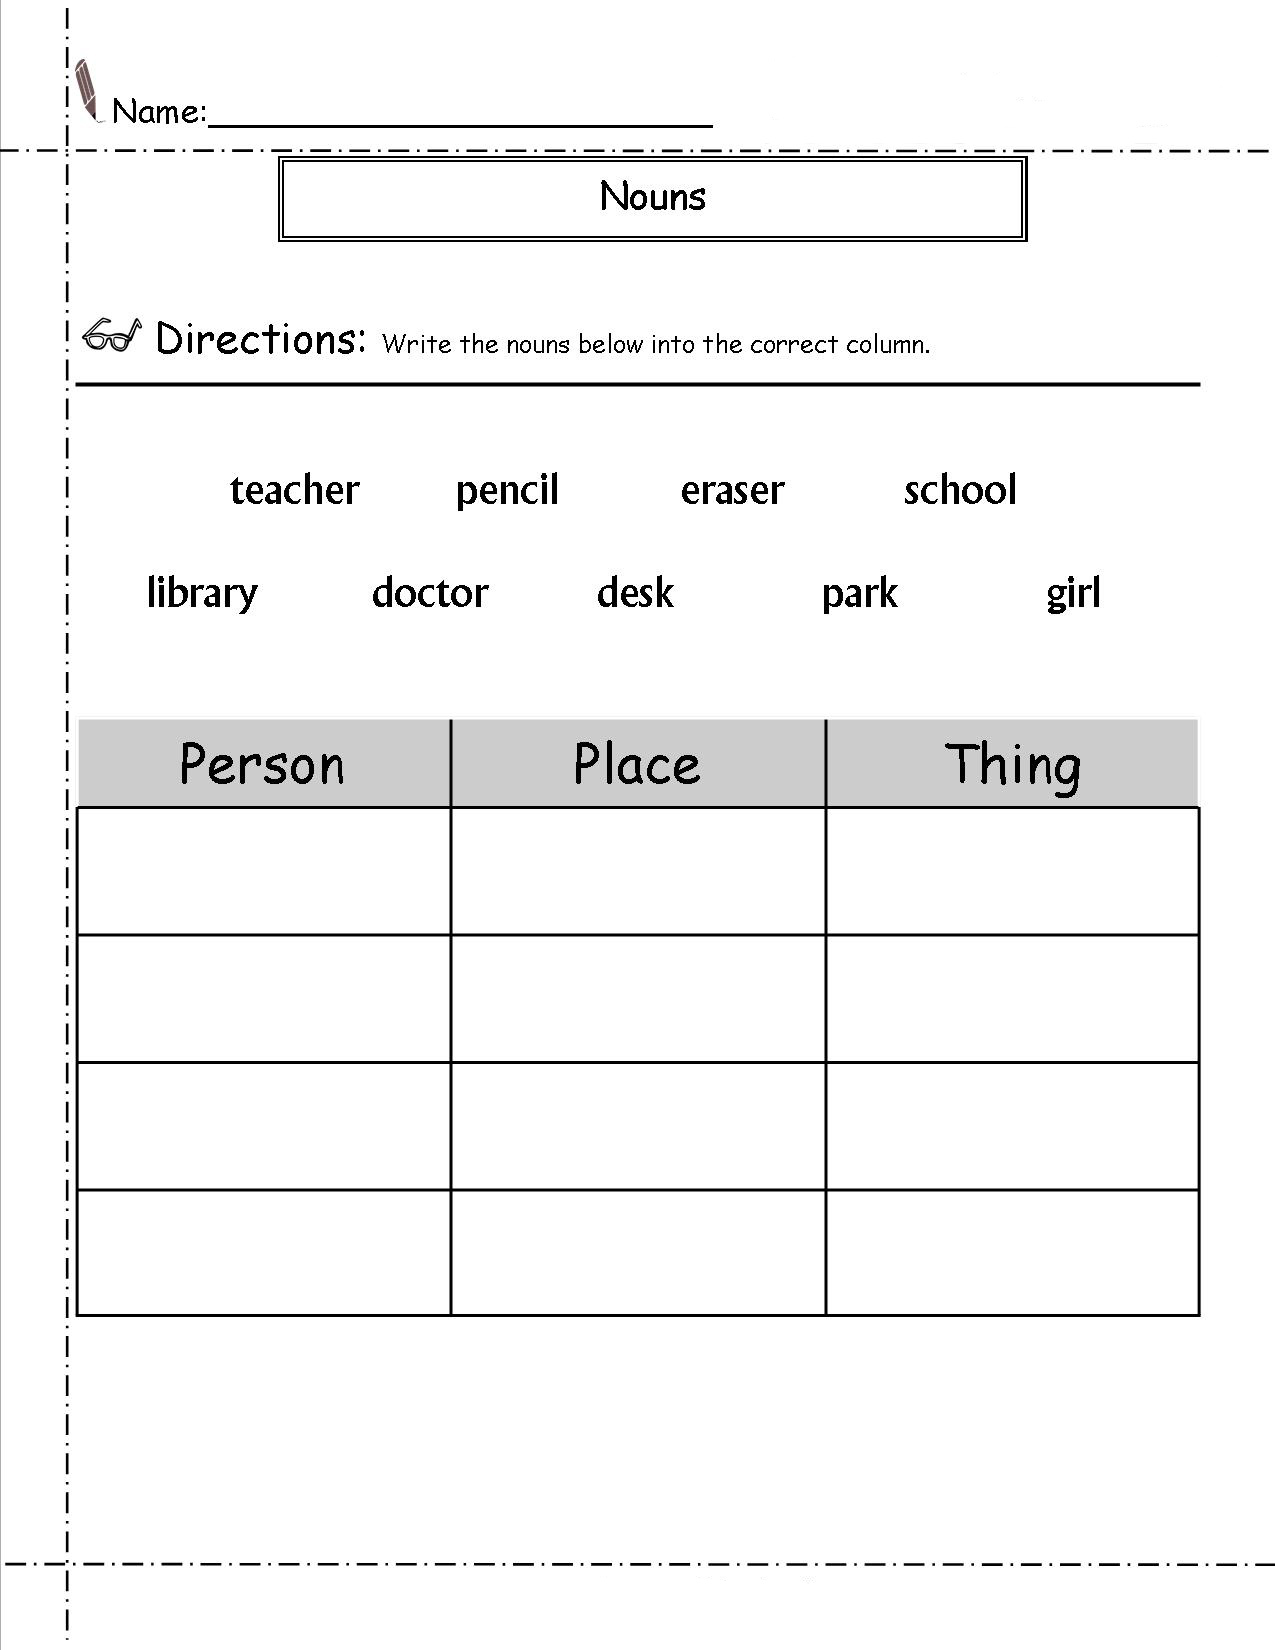 23nd Grade English Worksheets - Best Coloring Pages For Kids With Proper Nouns Worksheet 2nd Grade